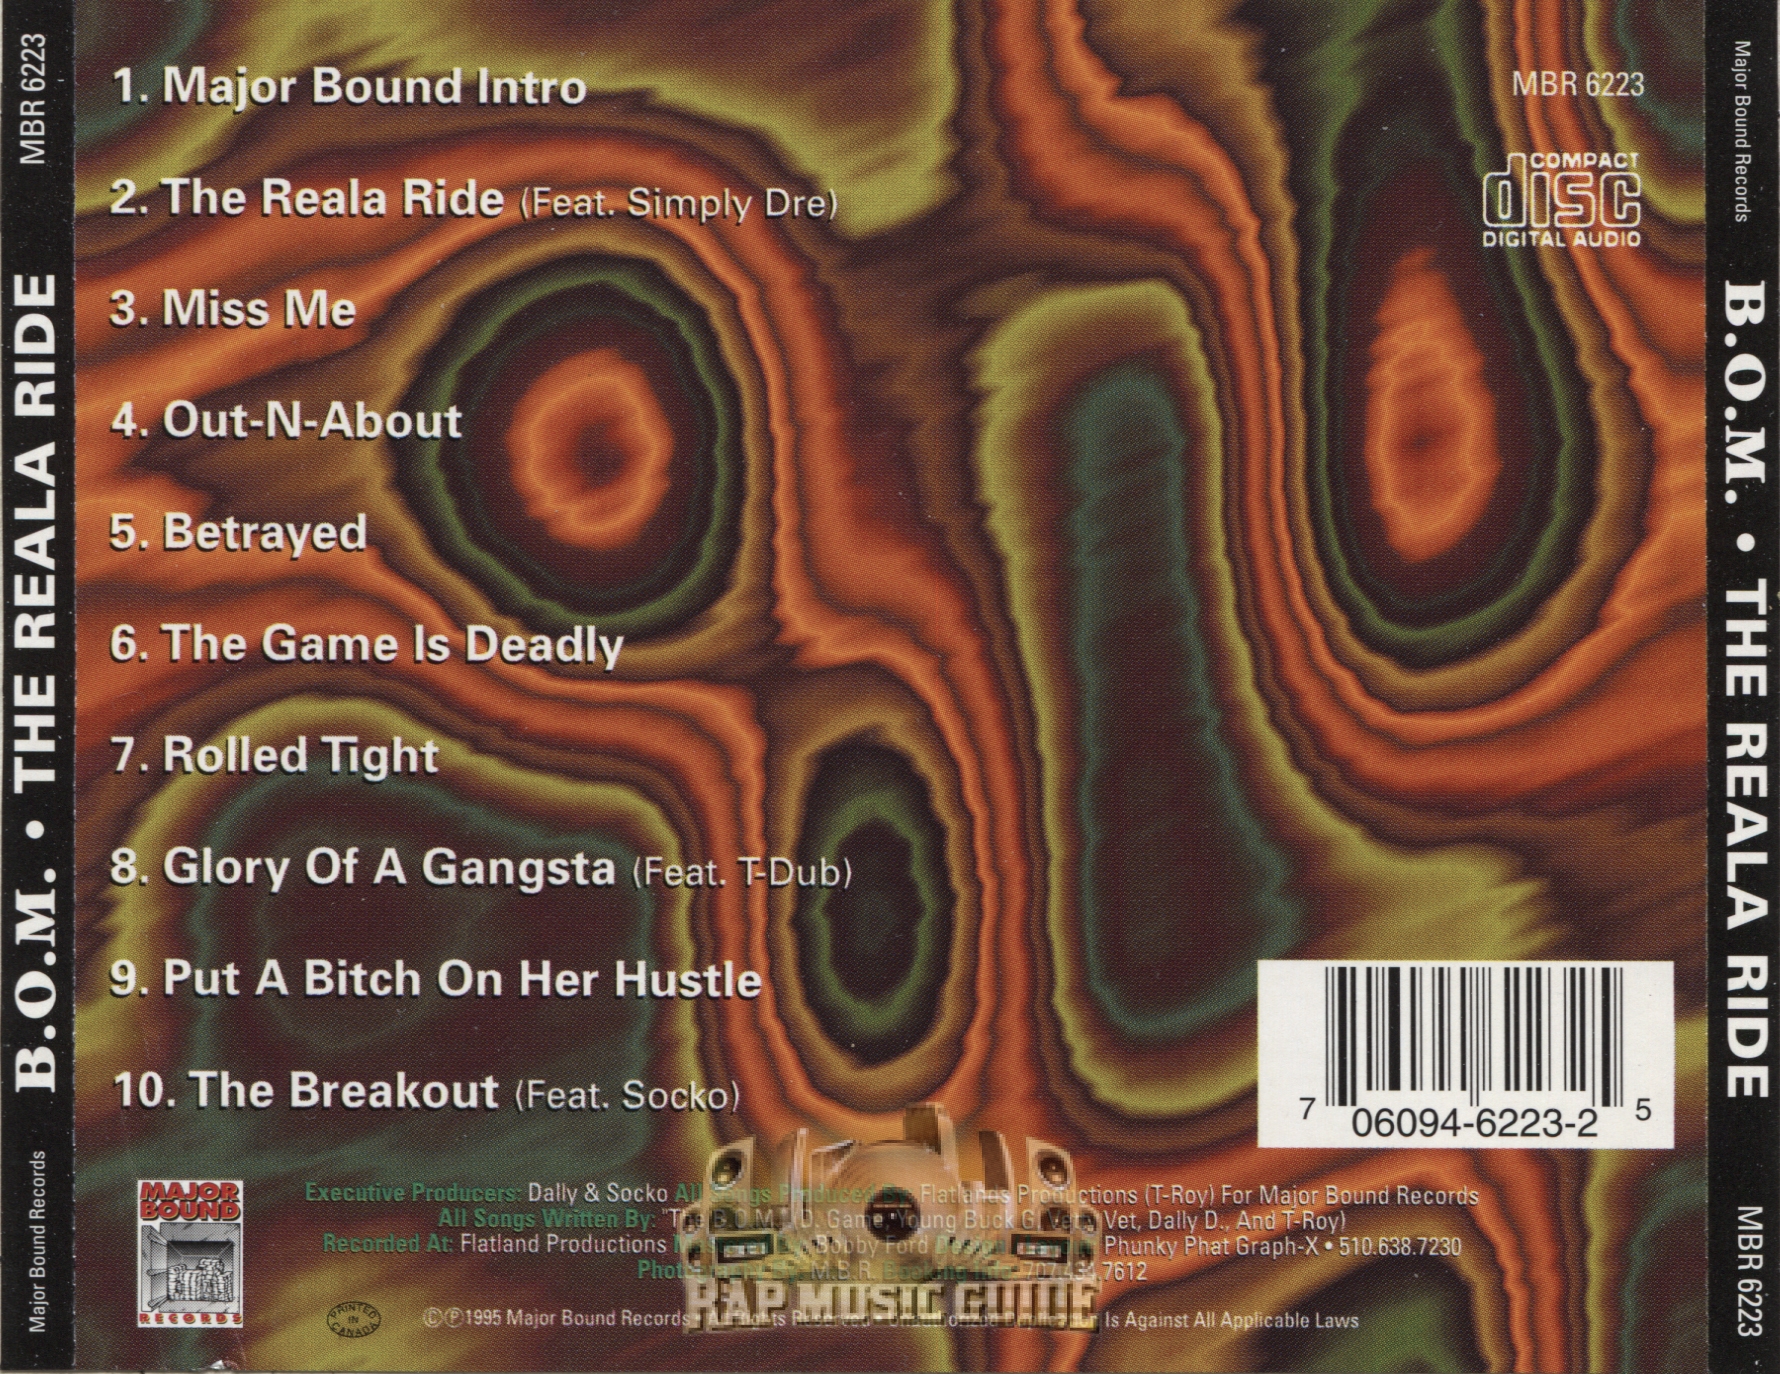 Ballers Ona Mission - The Reala Ride: 1st Press. CD | Rap Music Guide